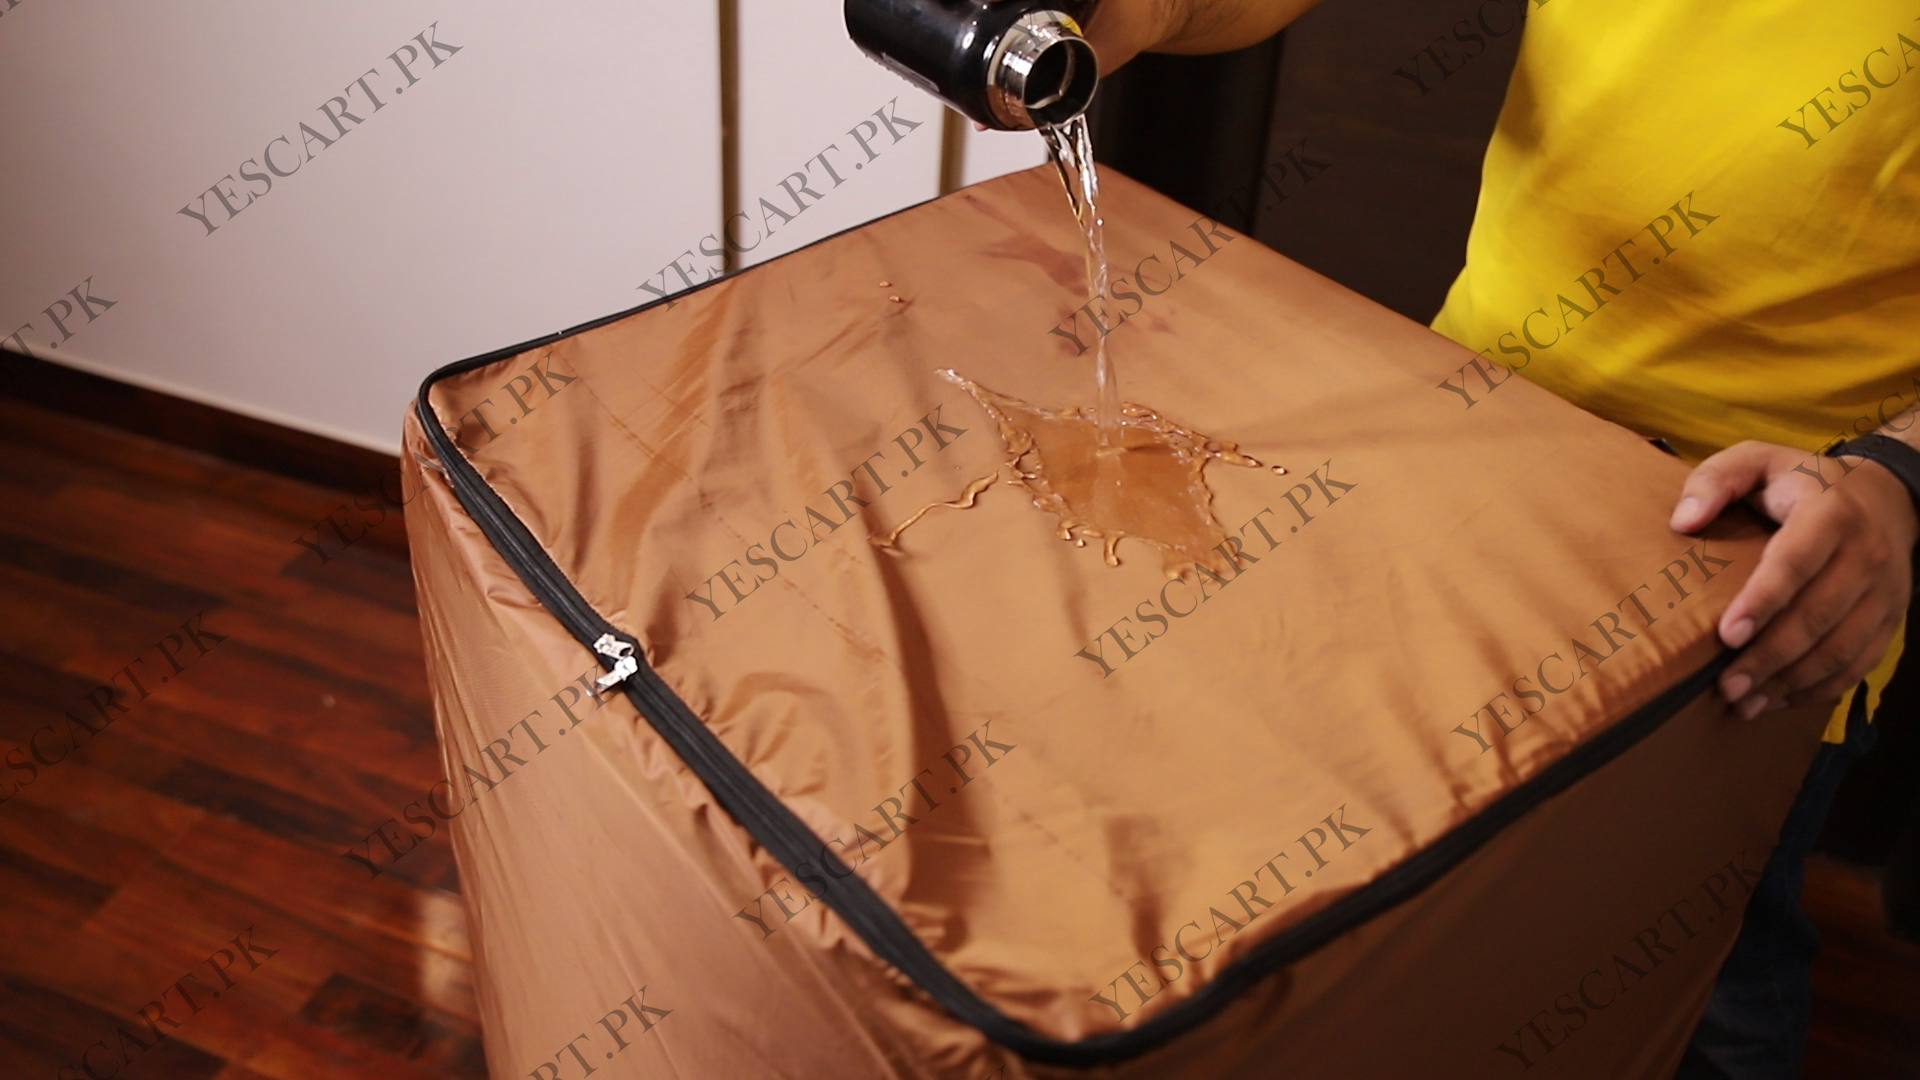 Waterproof Top Loaded Washing Machine Cover (Brown Color)